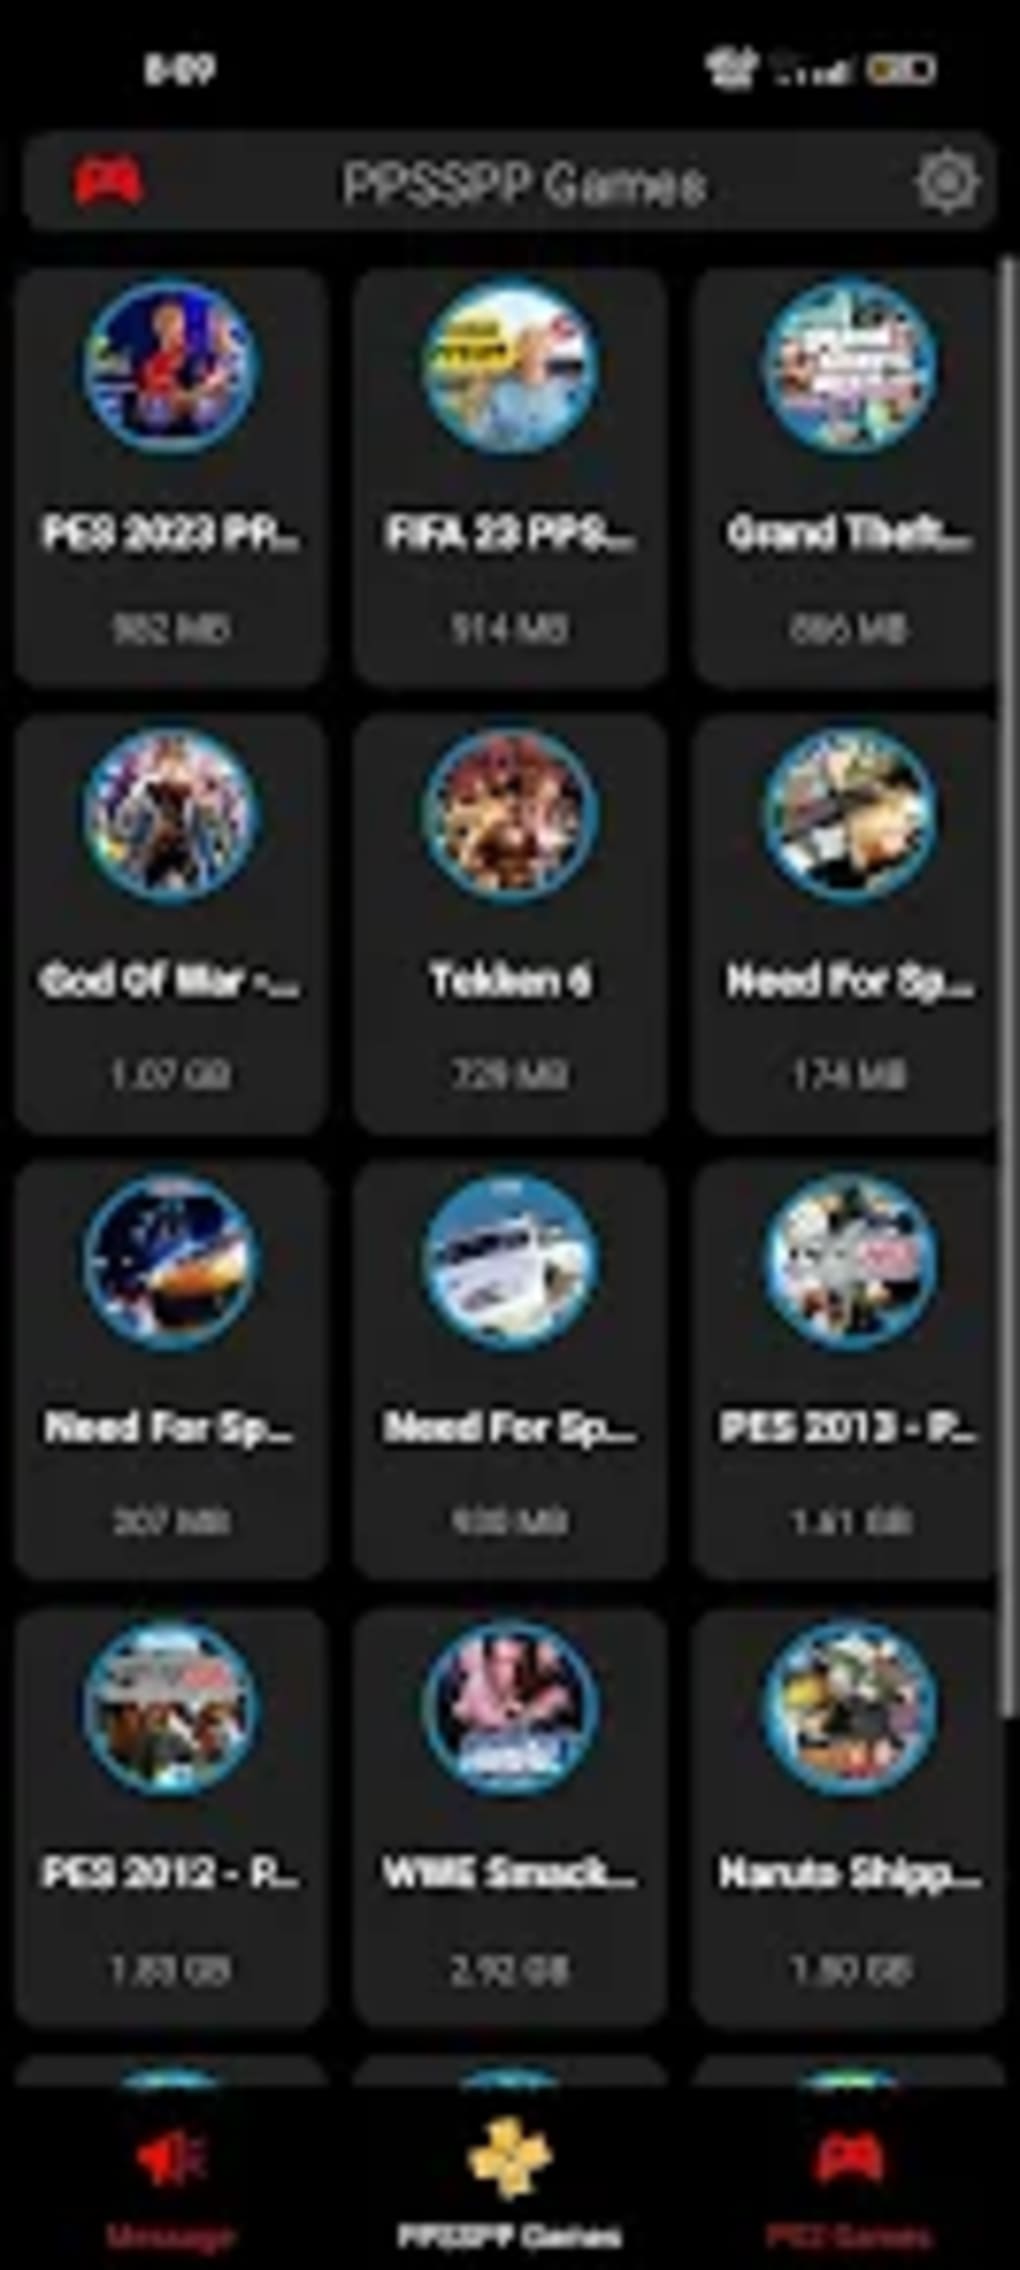 psp games download - Apps on Google Play